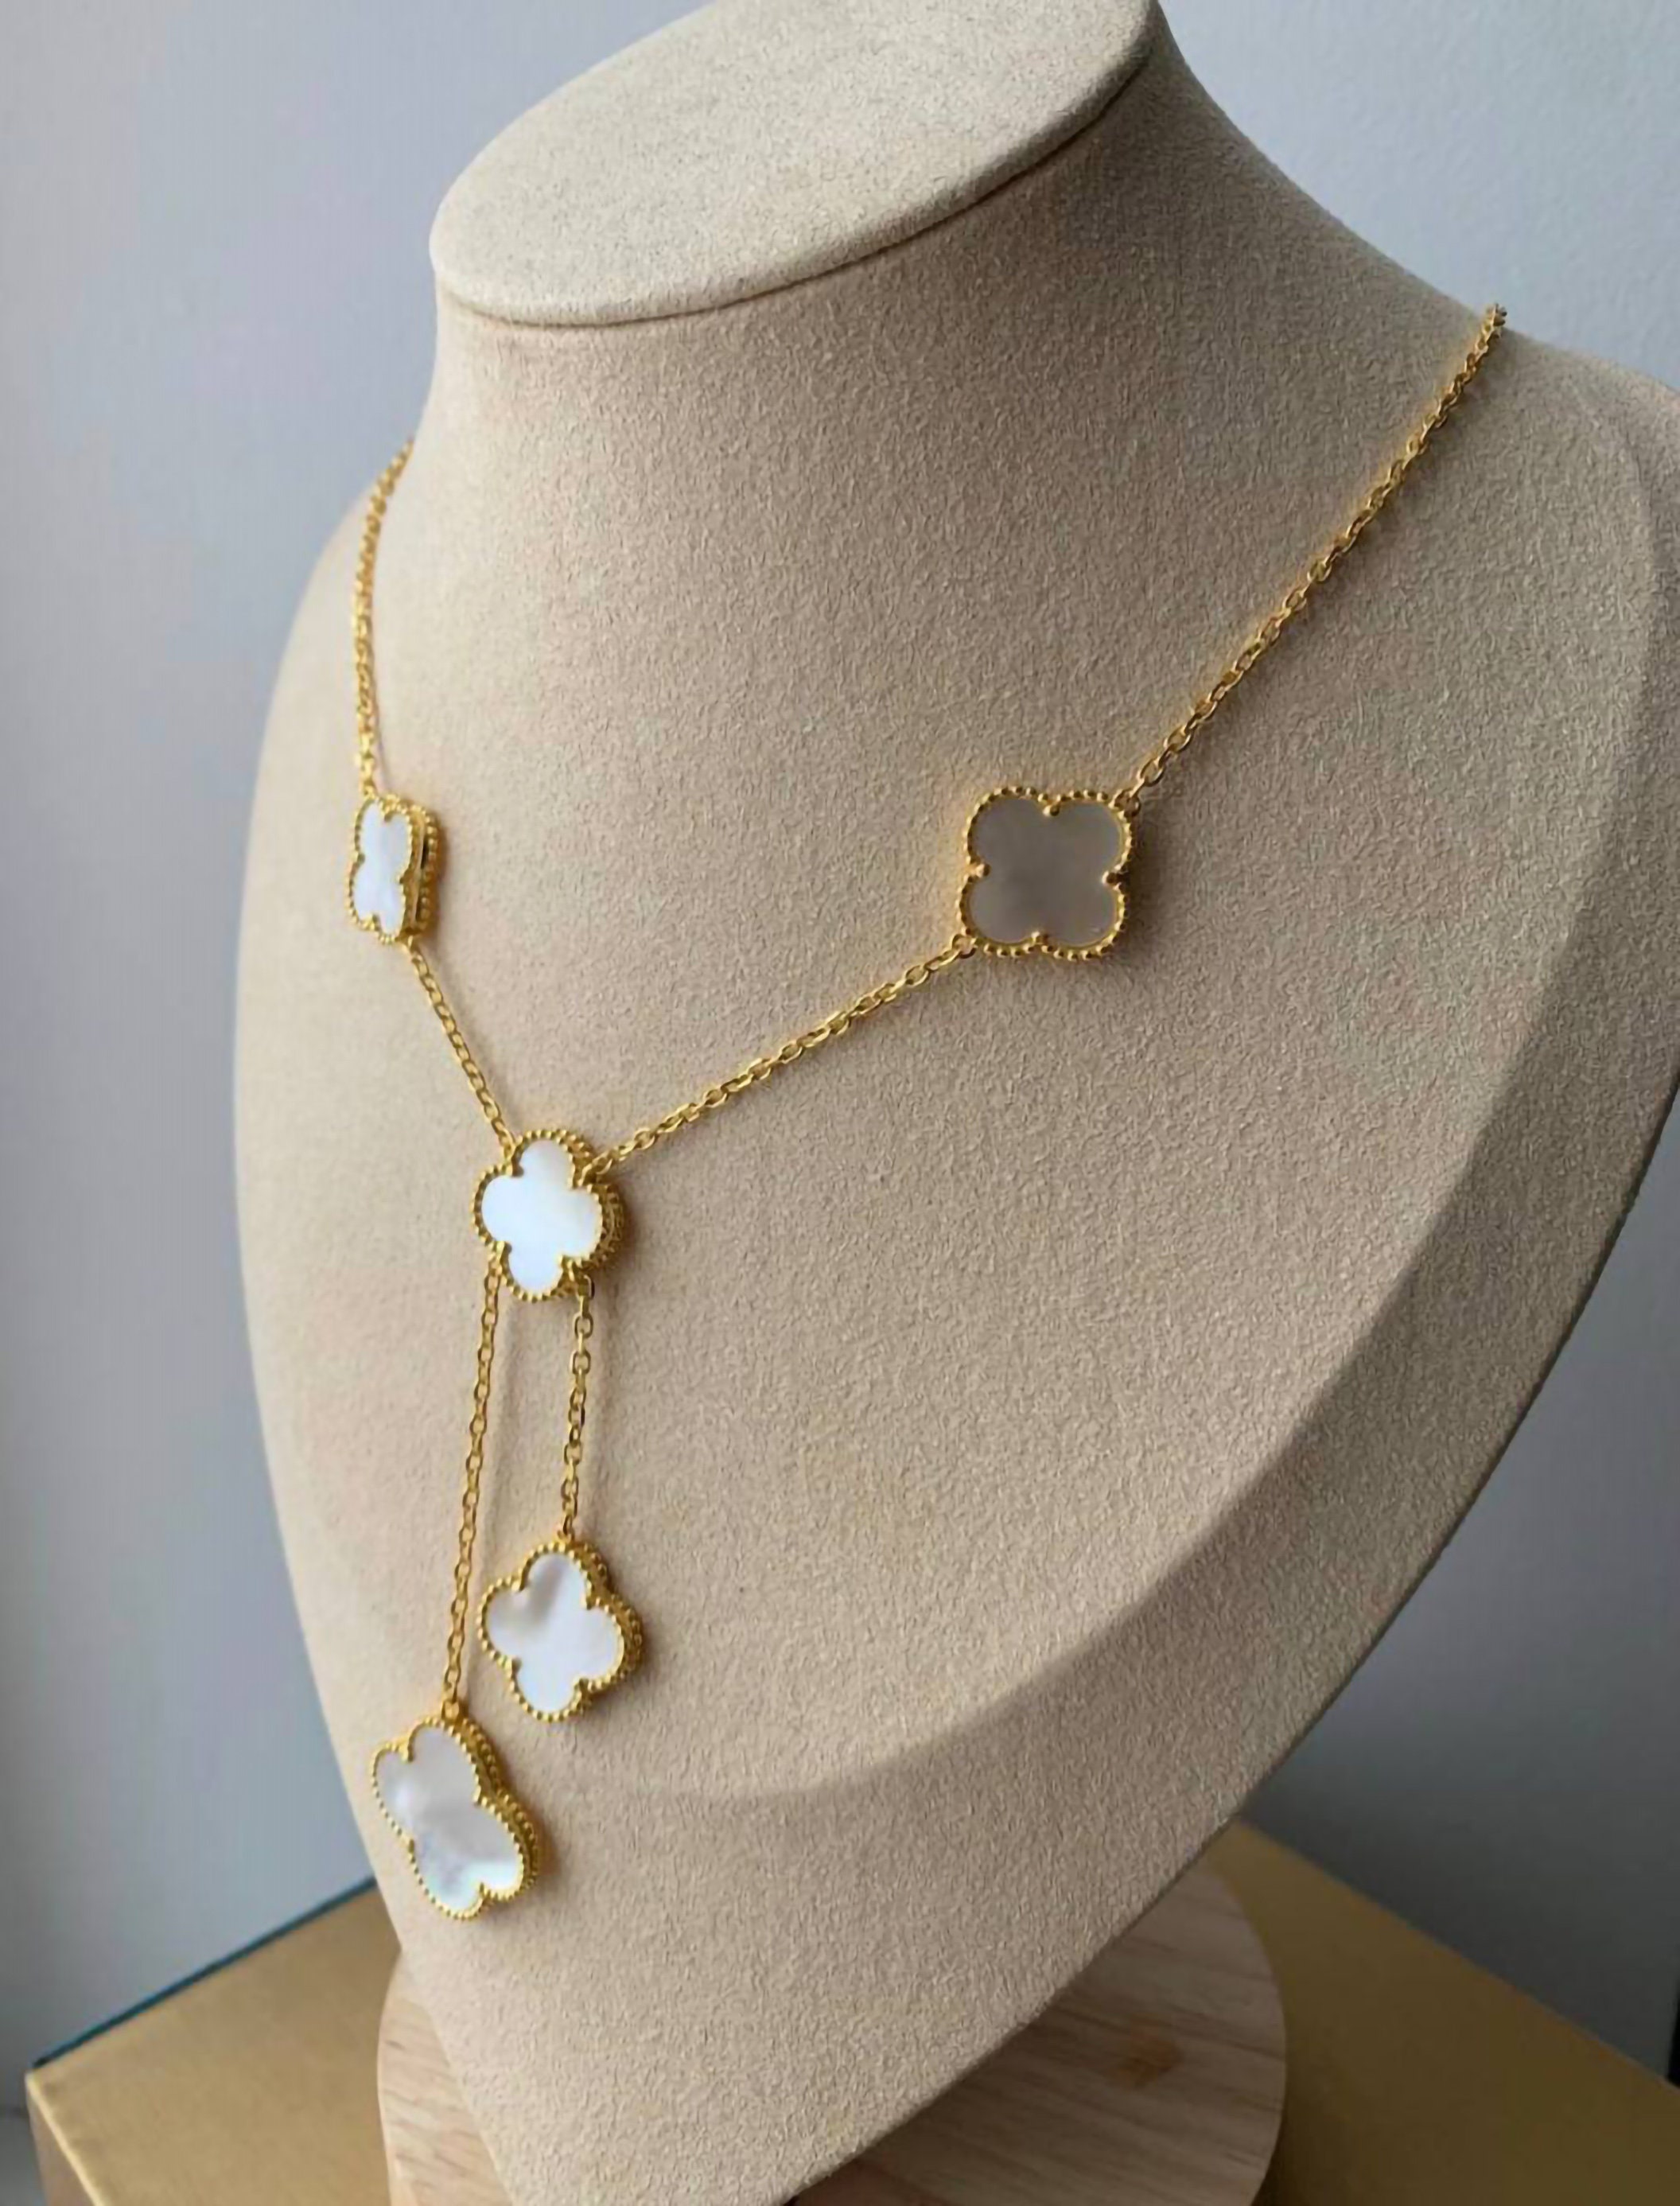 6 Motifs Clover Necklace Mother of Pearl Necklace 18k Gold - Etsy